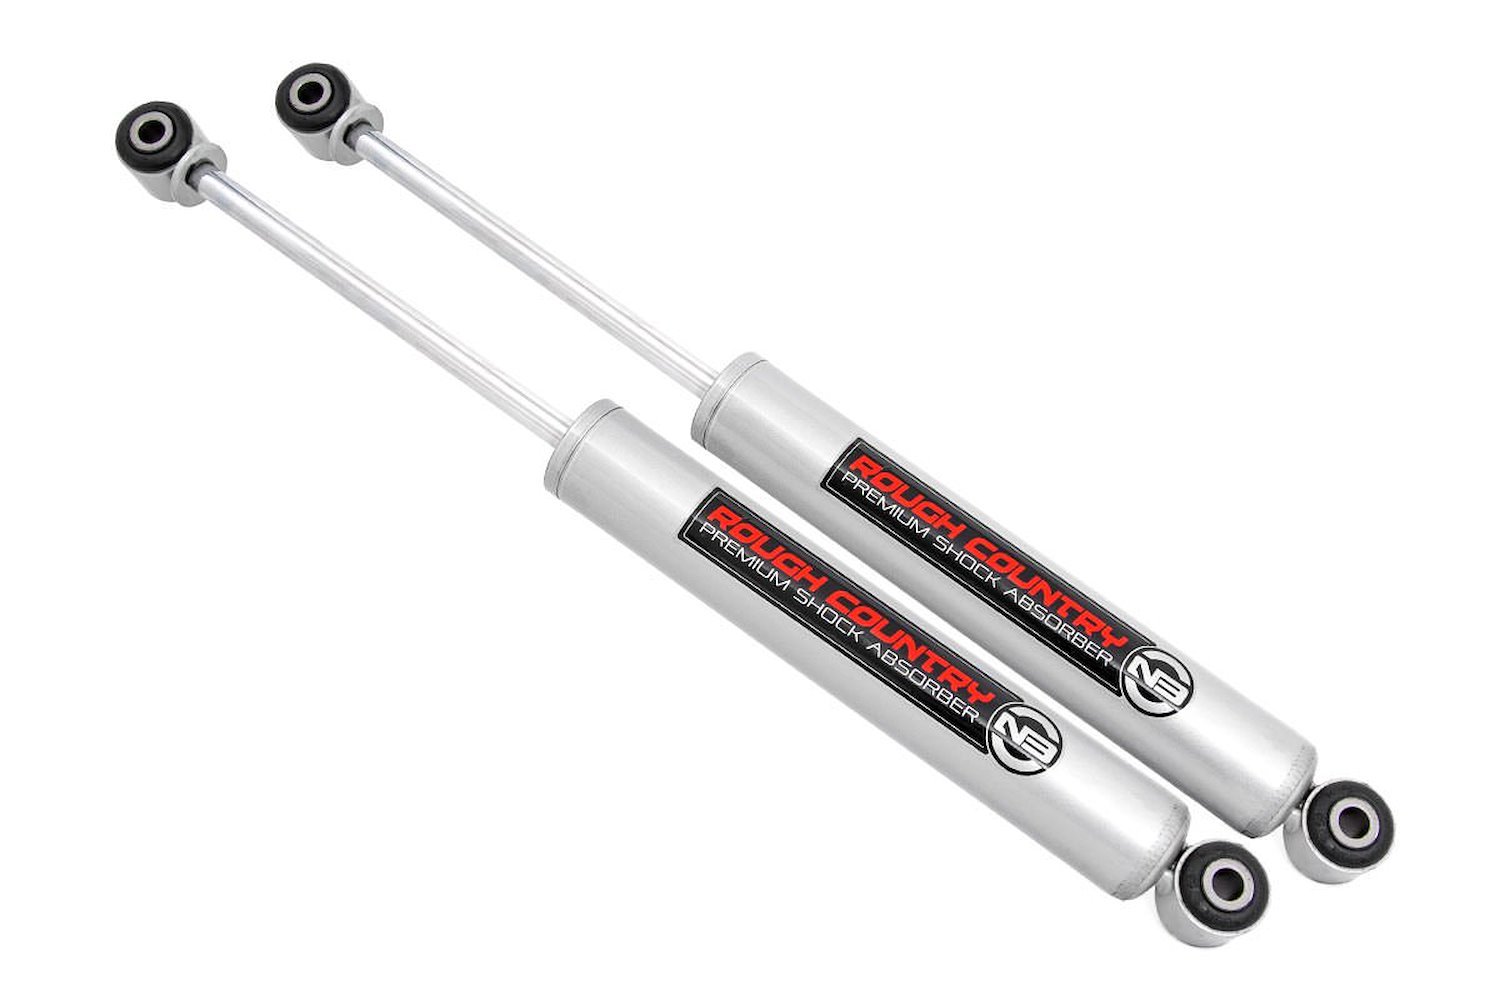 23196_A Chevy/GMC C1500/K1500 Pickup 4WD (88-99) N3 Front Shocks (Pair), 2.5-3.5"